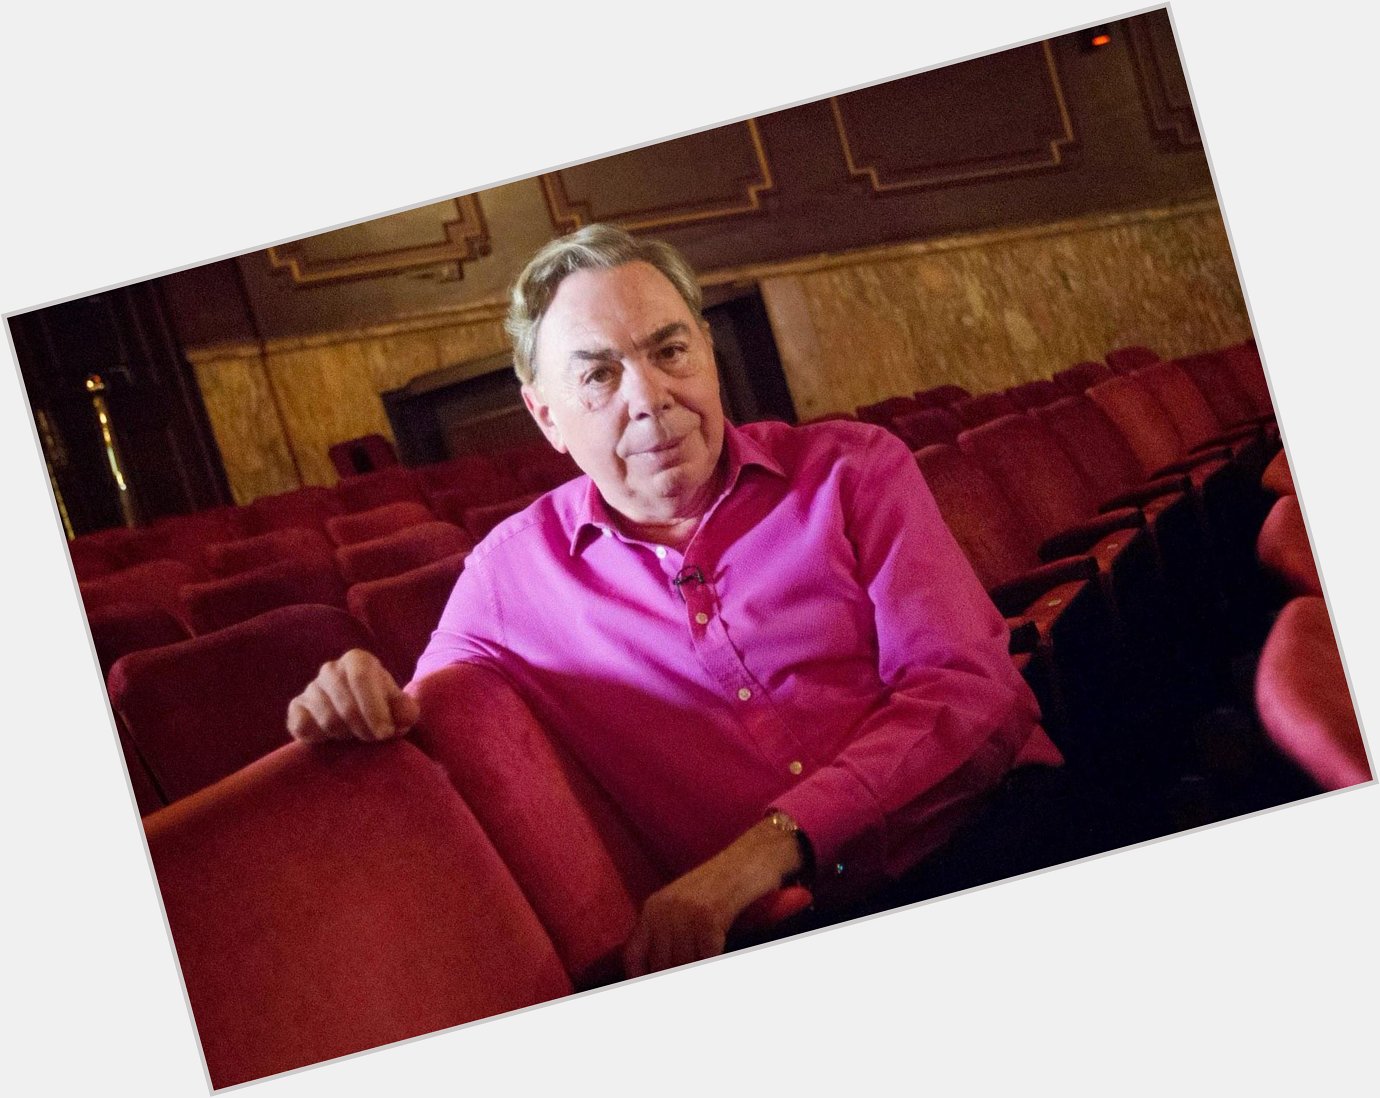 Happy 67th Birthday to the great composer, Sir Andrew Lloyd Webber! Many happy years to come! 